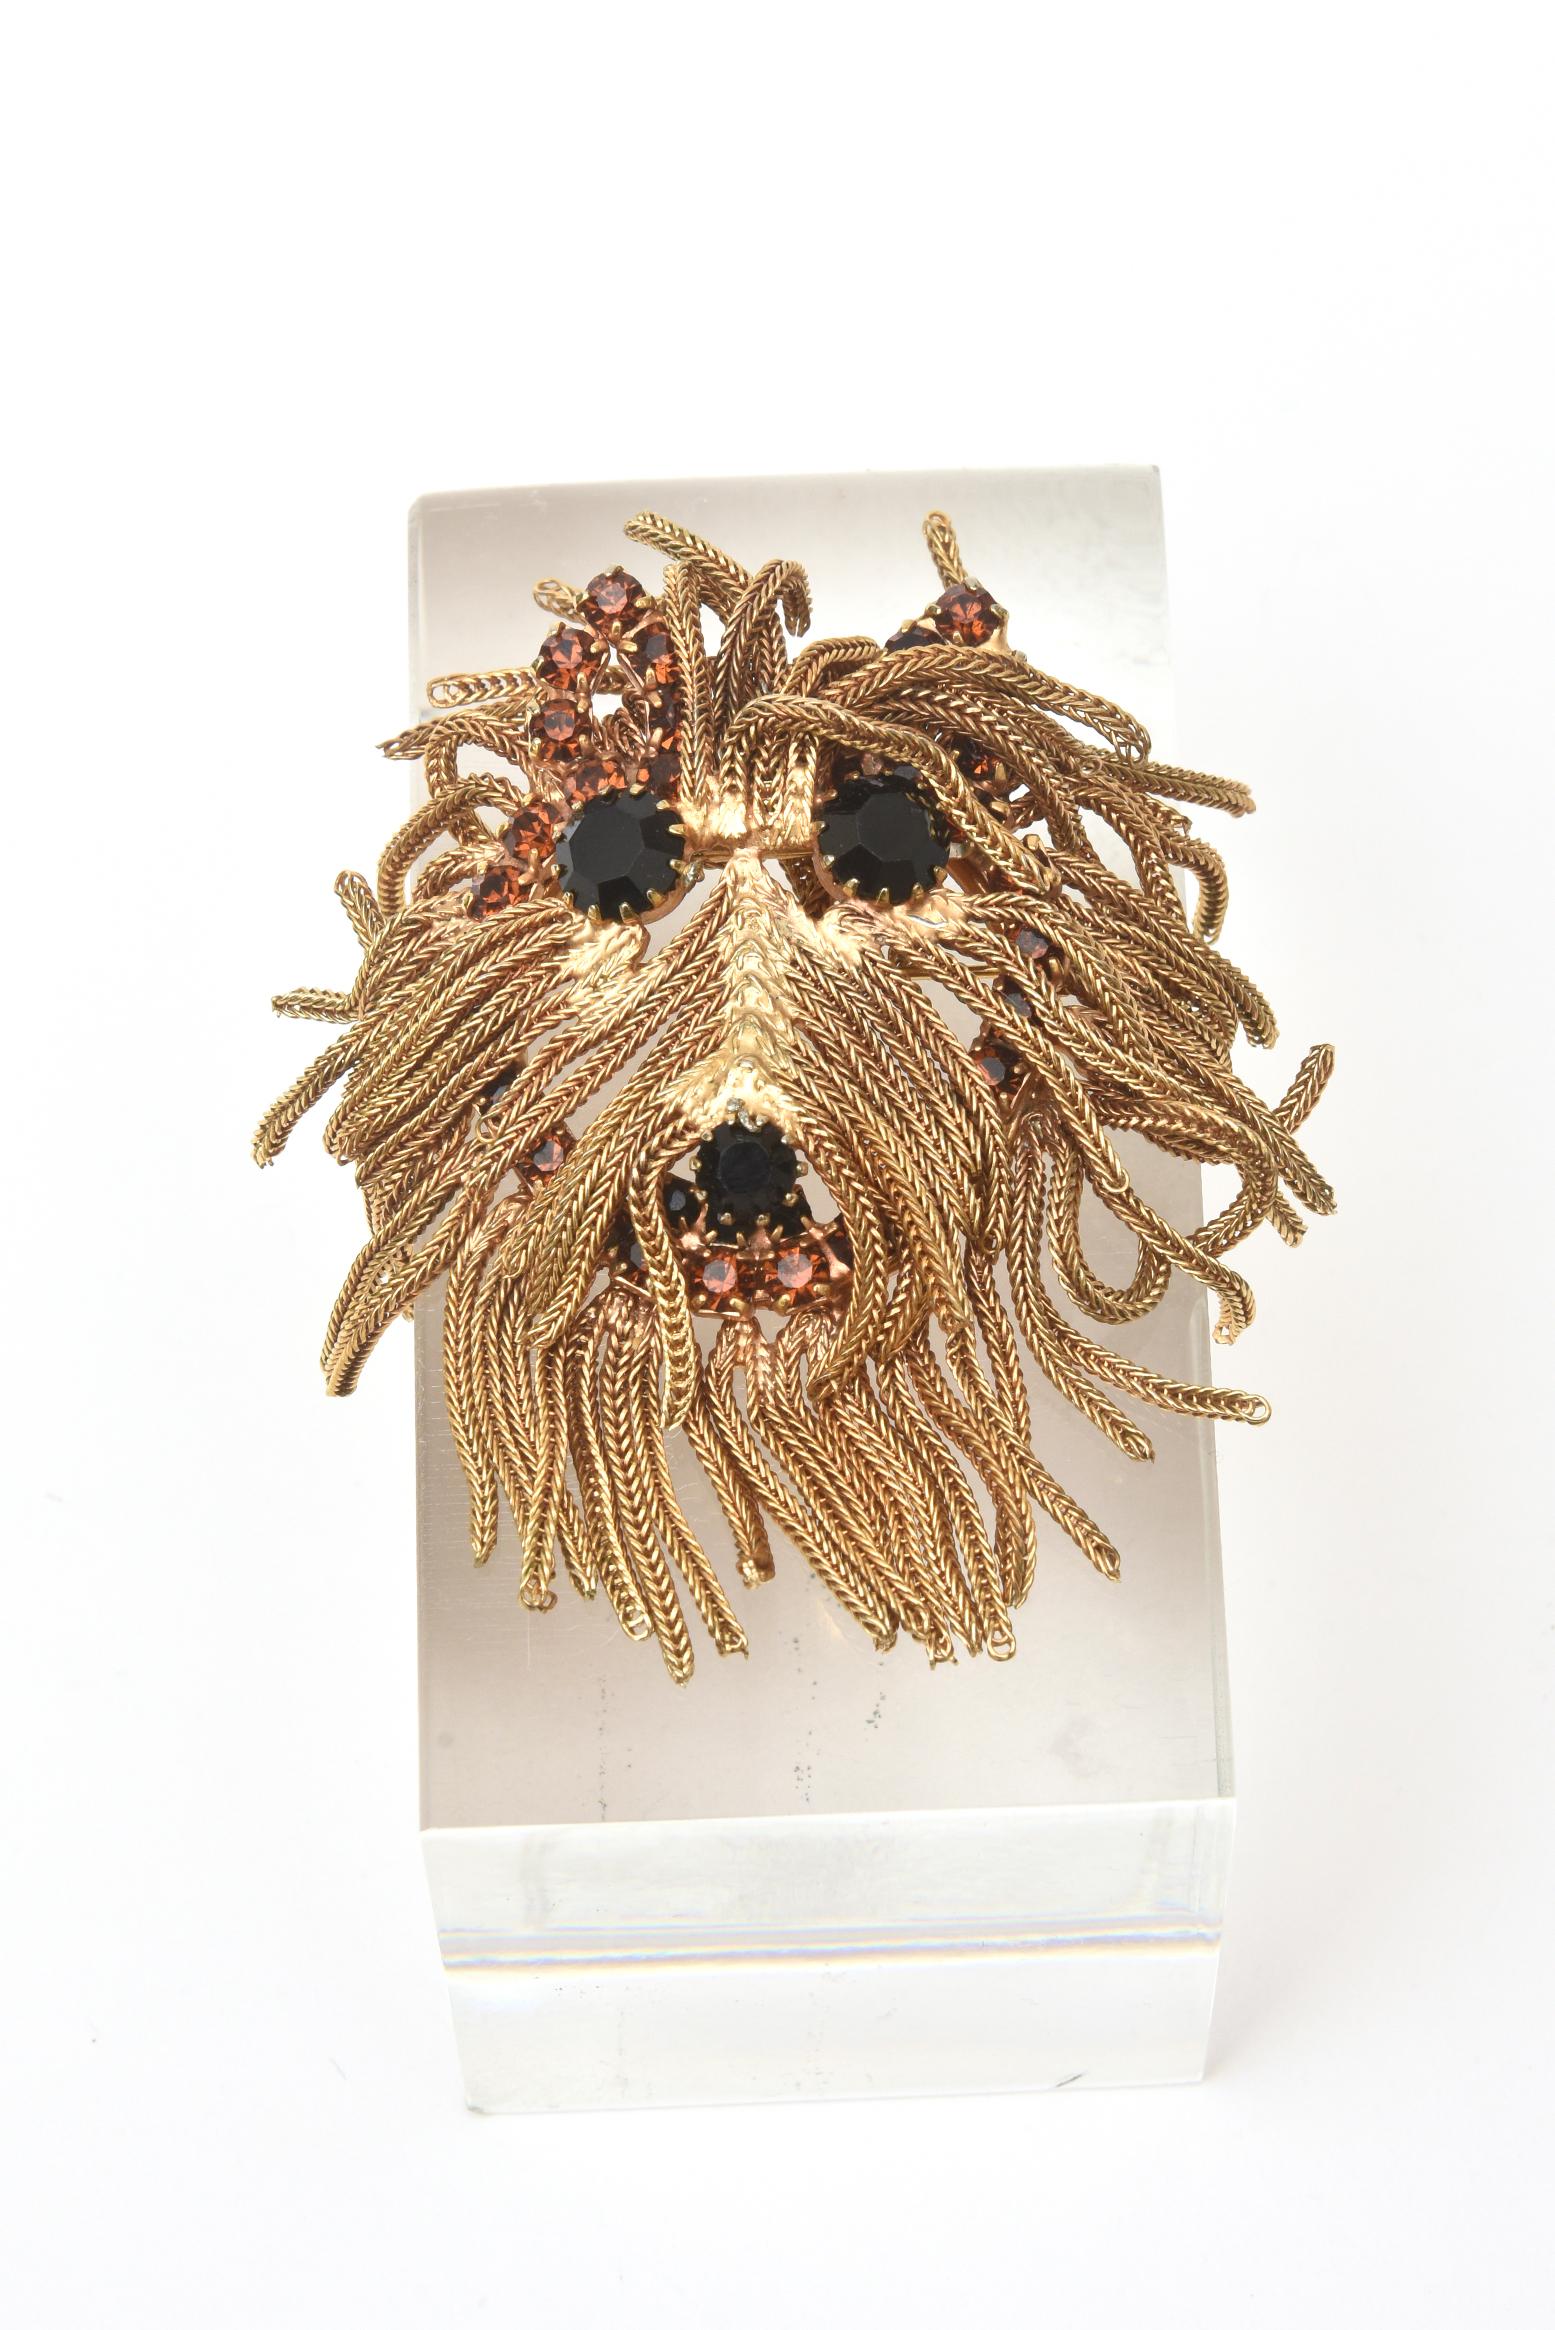 This fabulous gold fringed mane terrier dog head pin brooch and pendant is vintage from the 60's or 70's. It is versatile and definitely an eye catcher. You can wear it as a brooch or pendant. The prong set rhinestones are two different colors; one